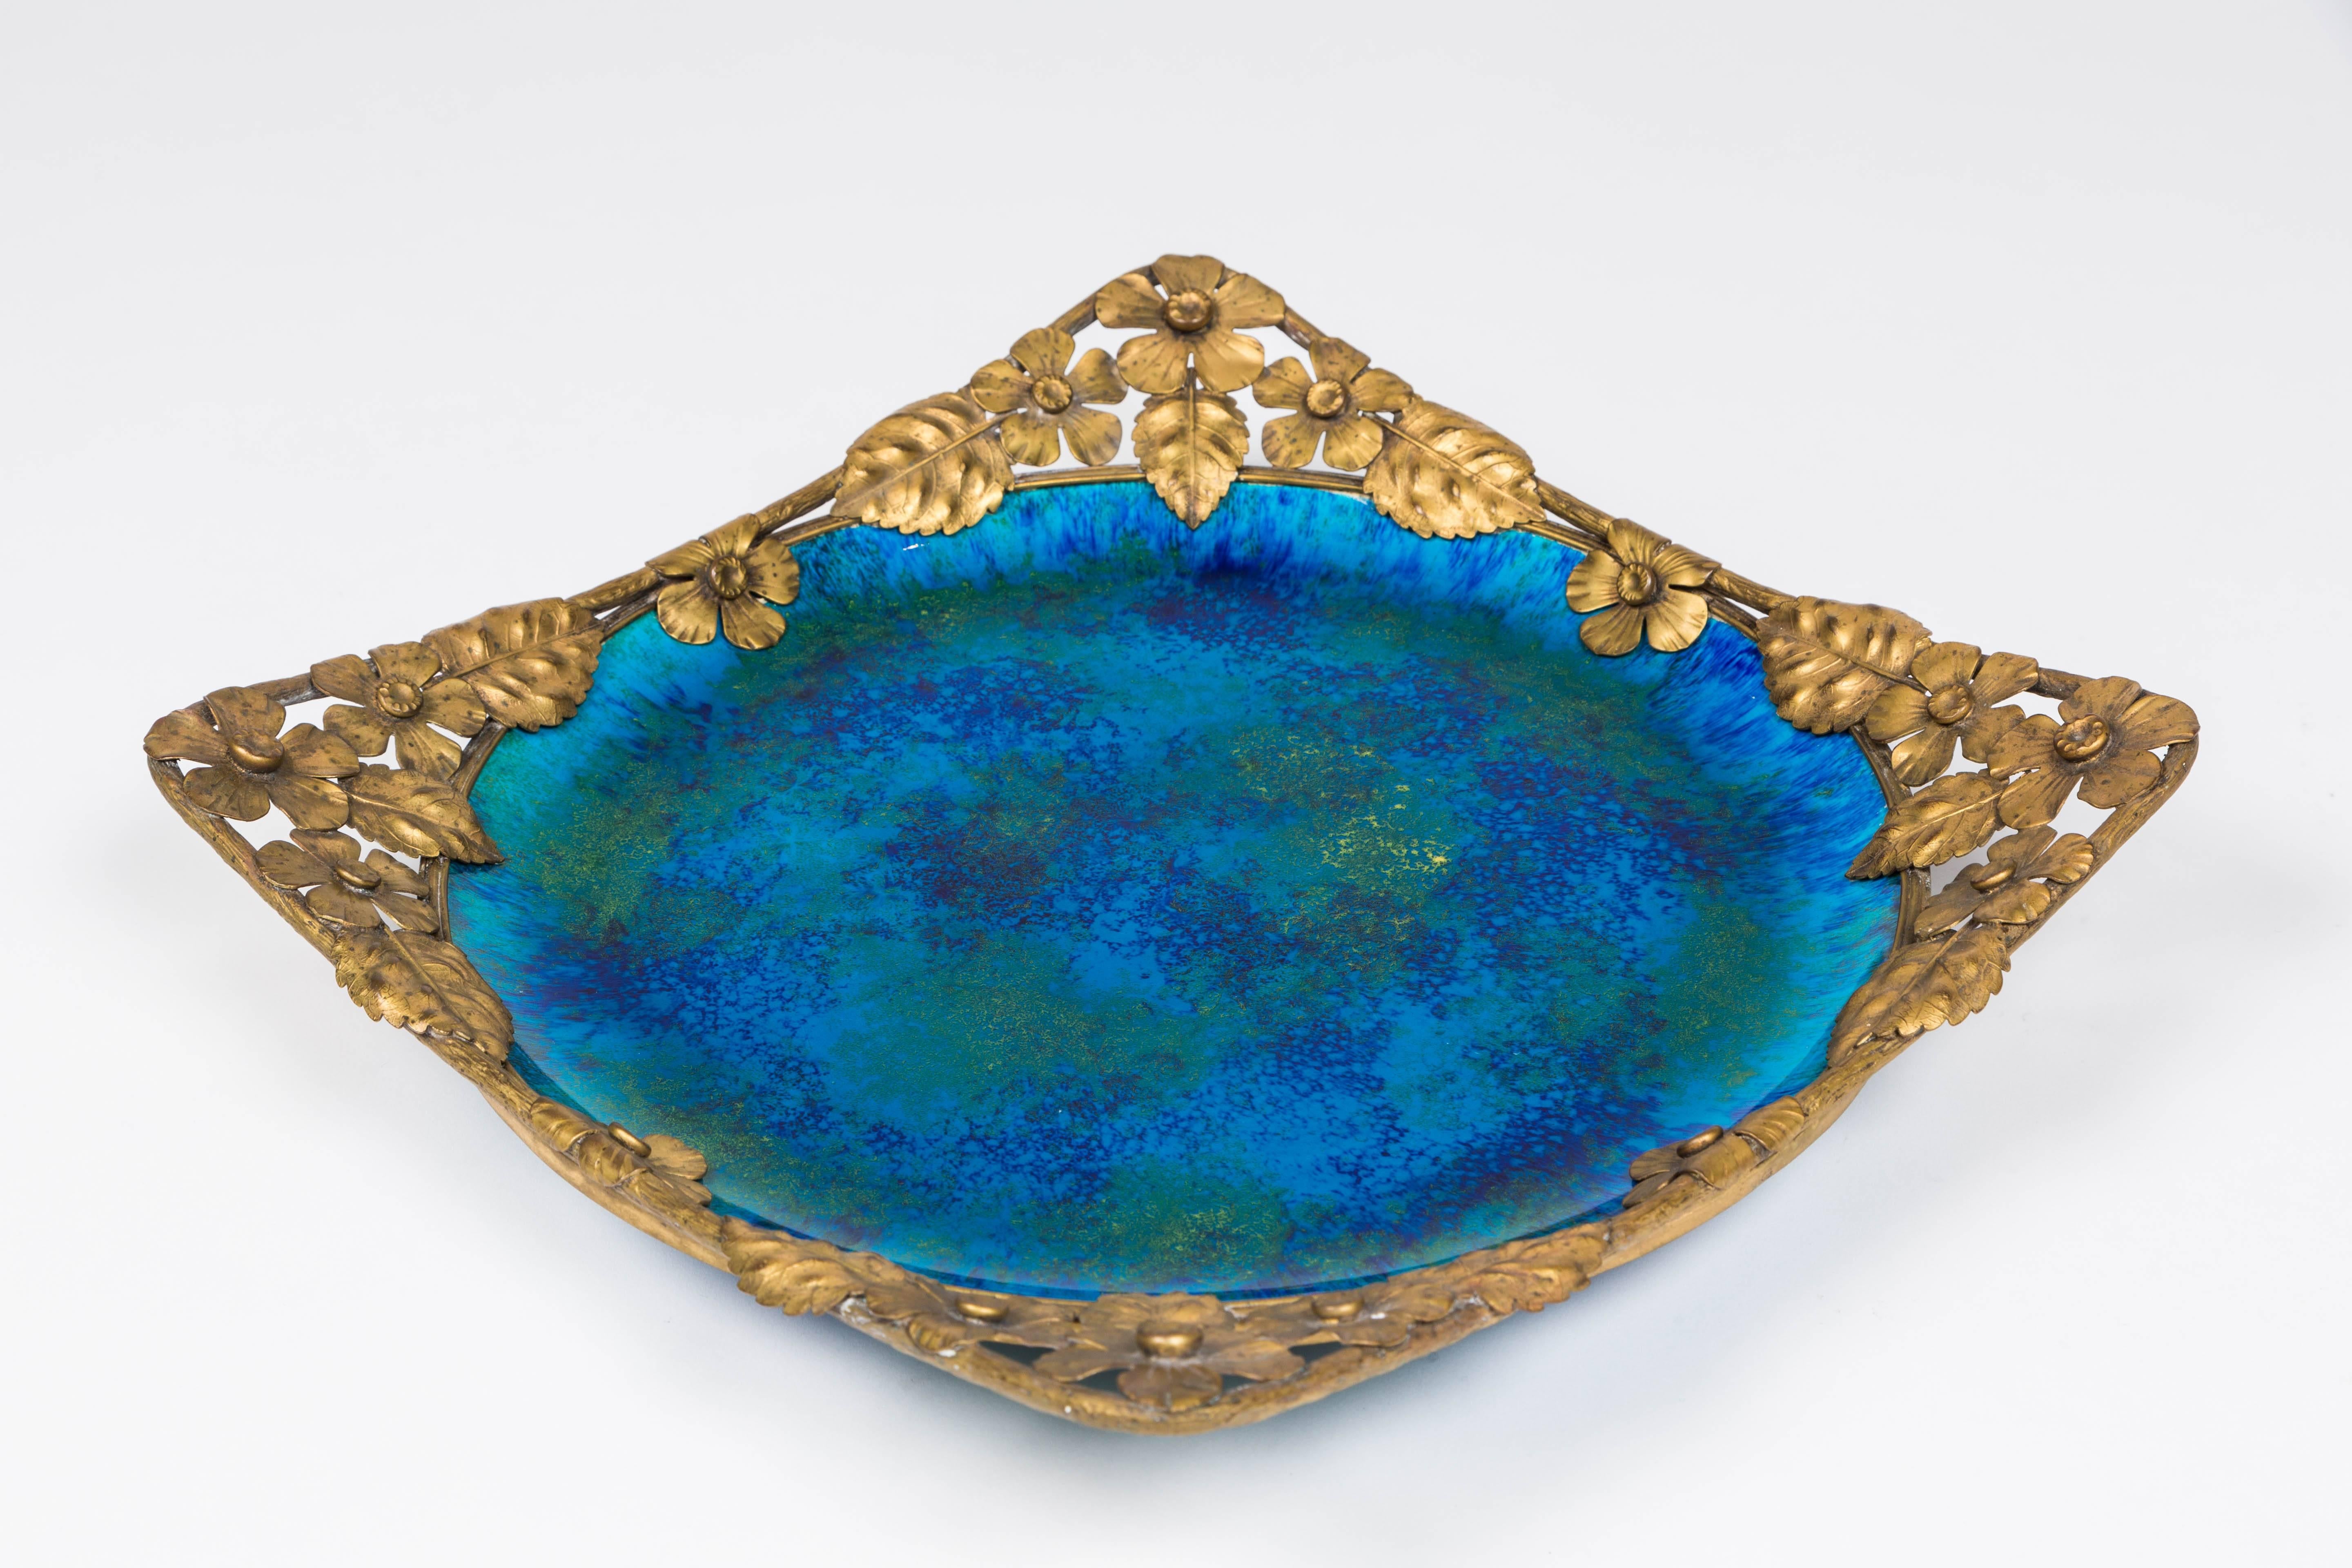 Early 20th Century  Platter with Gilt Metal Surround by Paul Millet for Sevres